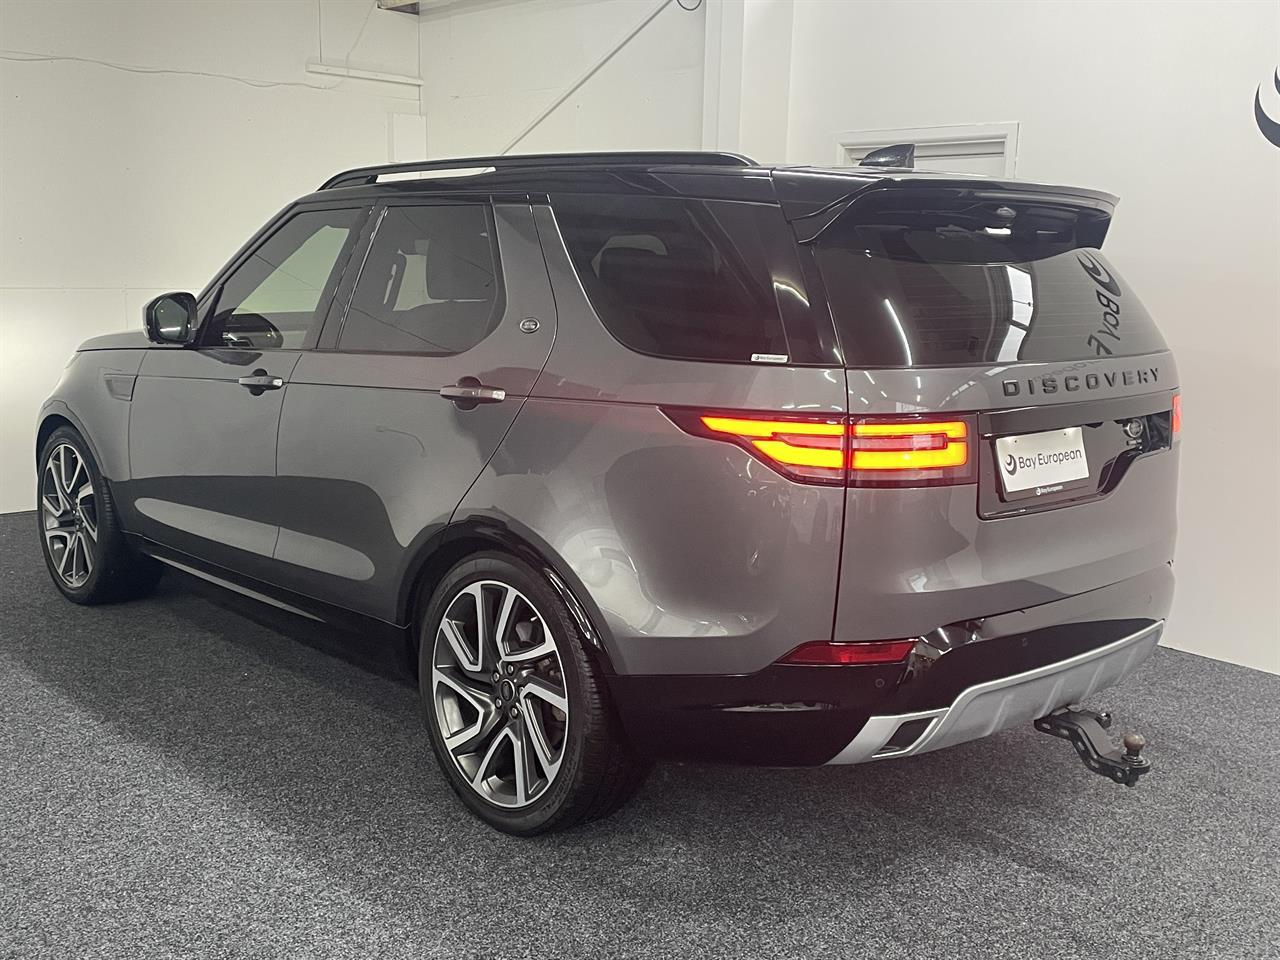 2018 Land Rover Discovery TD6 HSE Luxury 3.0D 7 Seater image 14